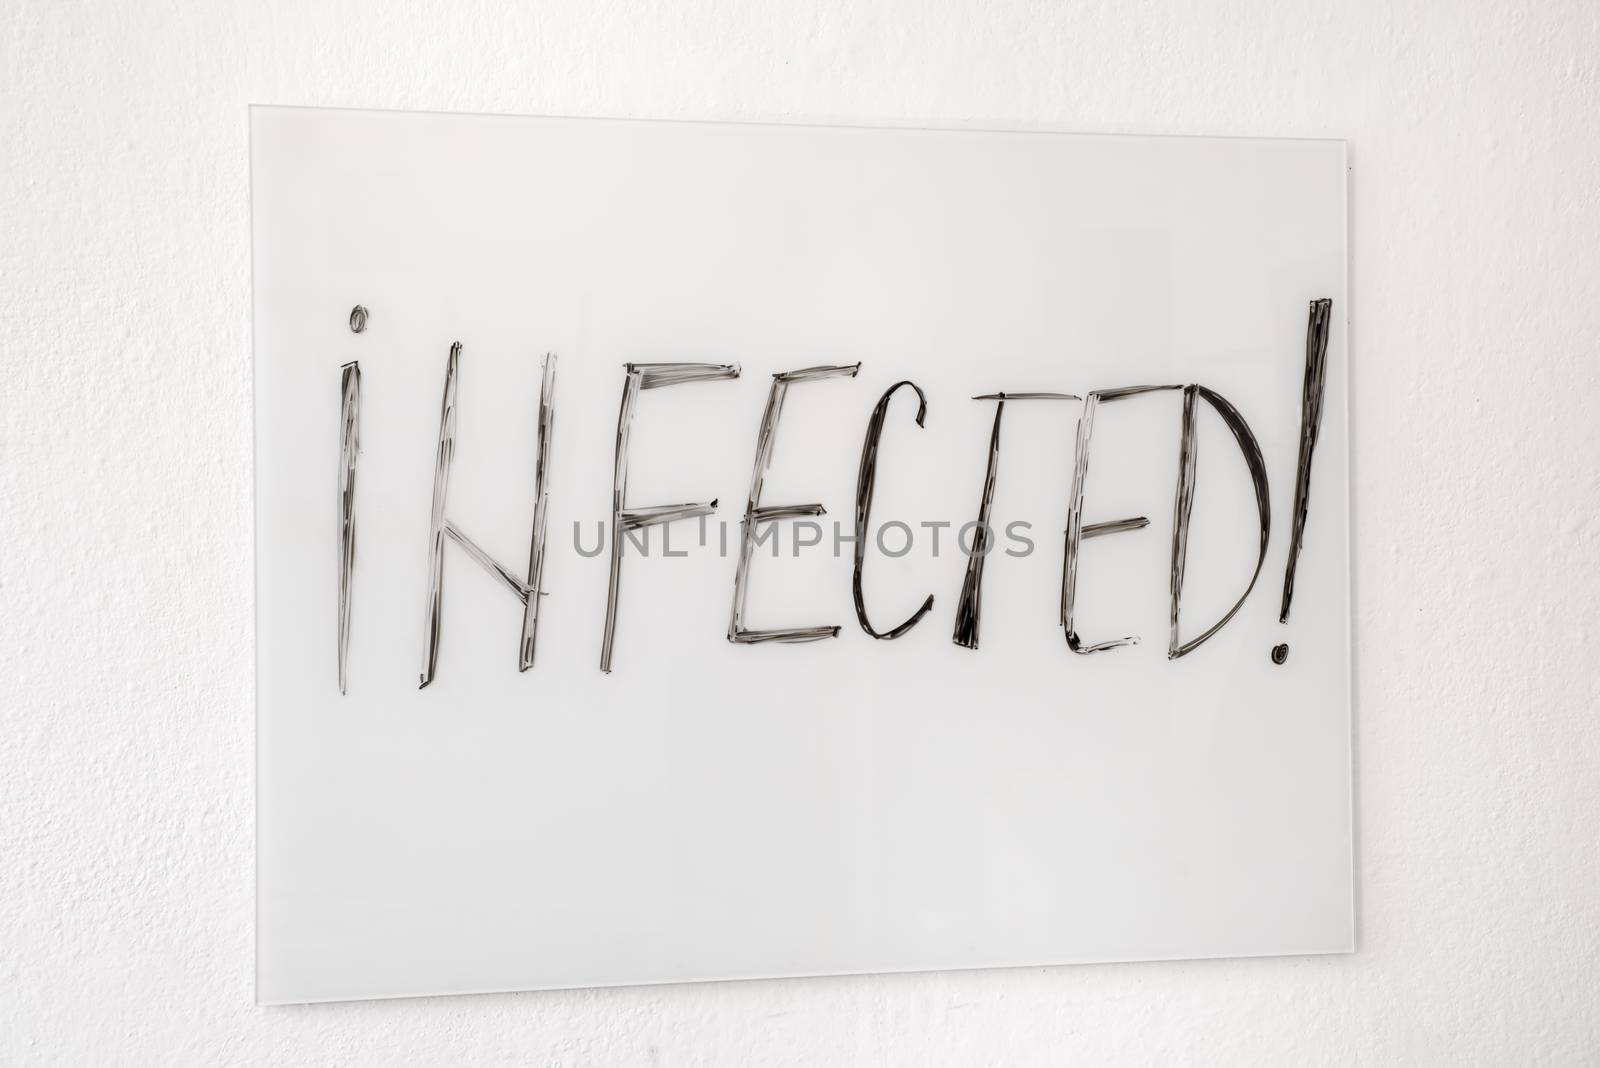 Infected message on white board by savcoco